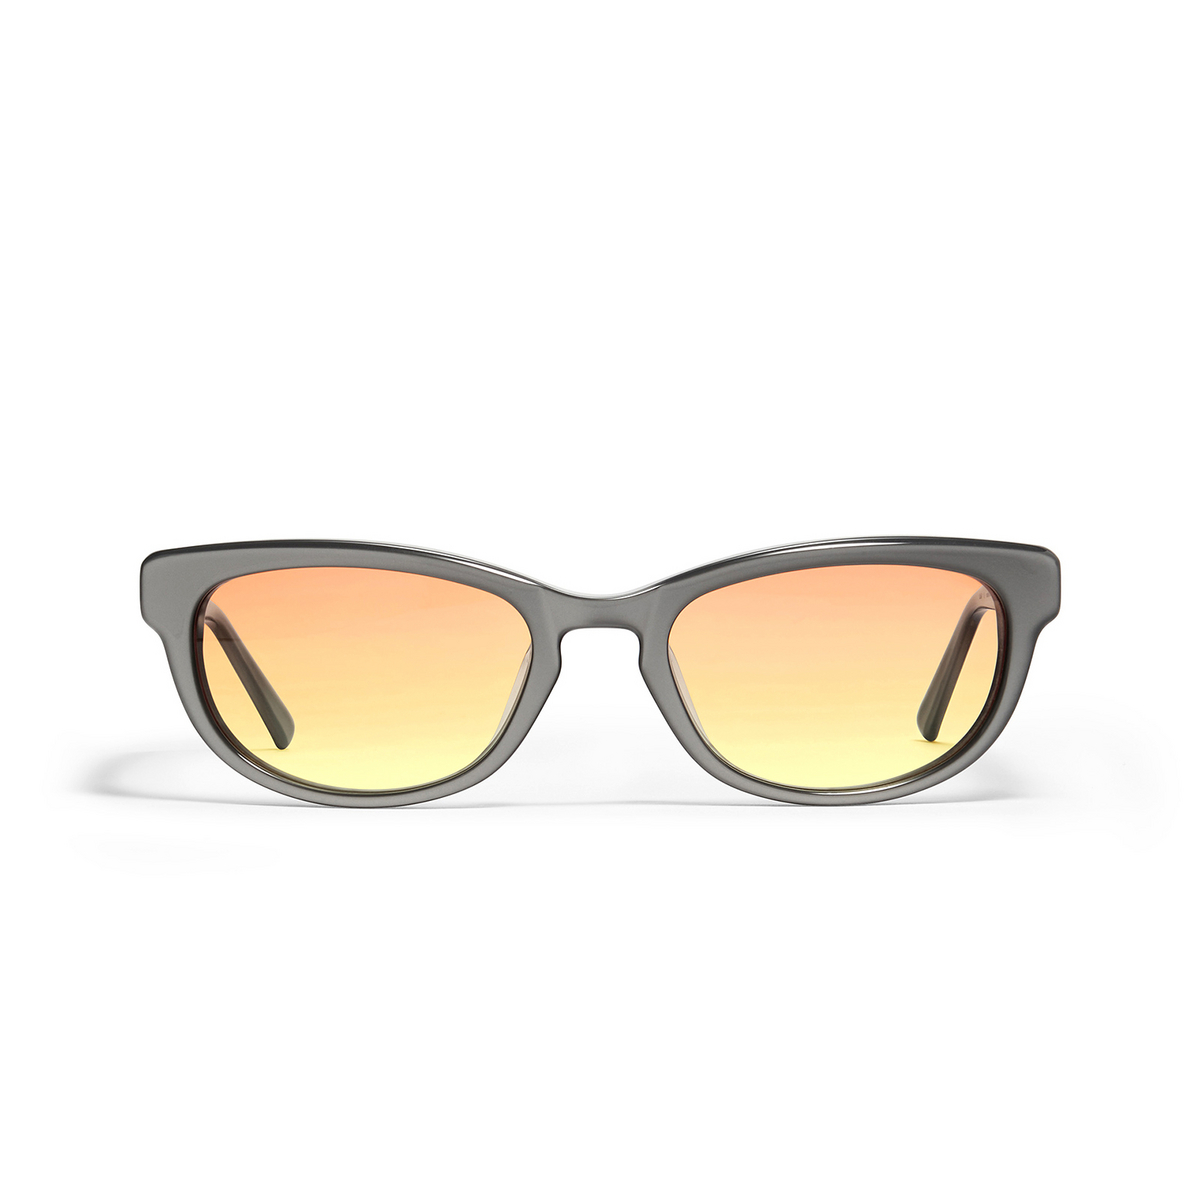 Gentle Monster® Cat-eye Sunglasses: Reny color Grey G4 - front view.